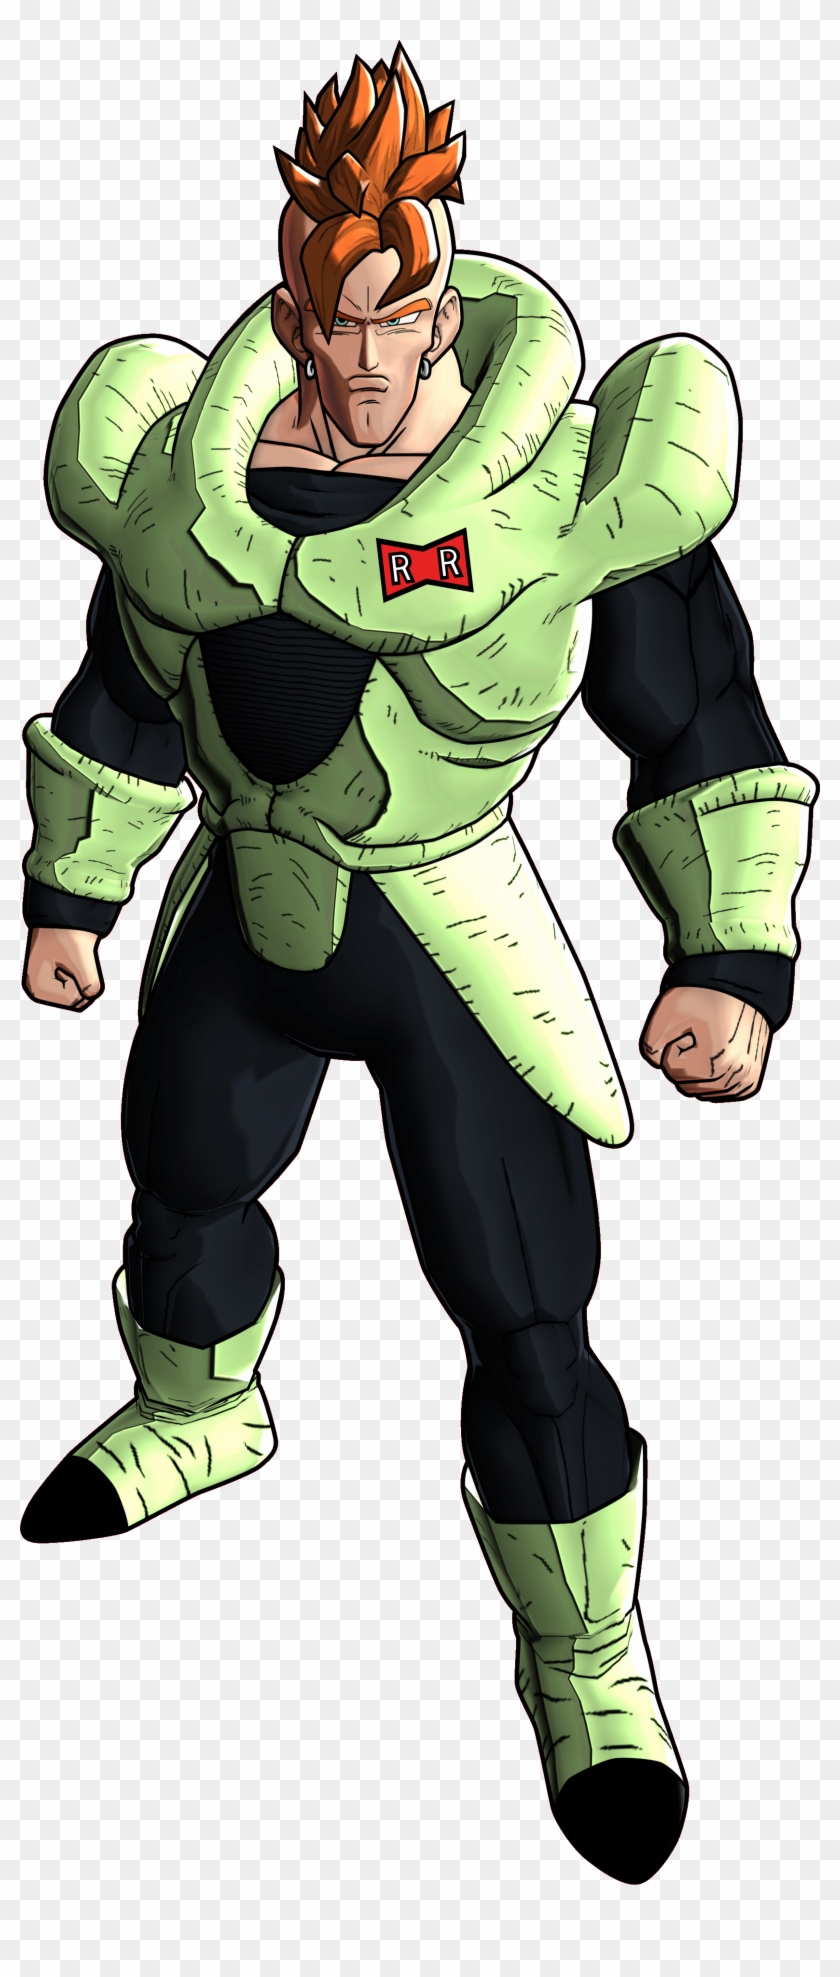 Android16 Battle Of Z Render Dragon Ball Fighterz Render Clipart 1986115 Pikpng - dragon ball fighter z roblox